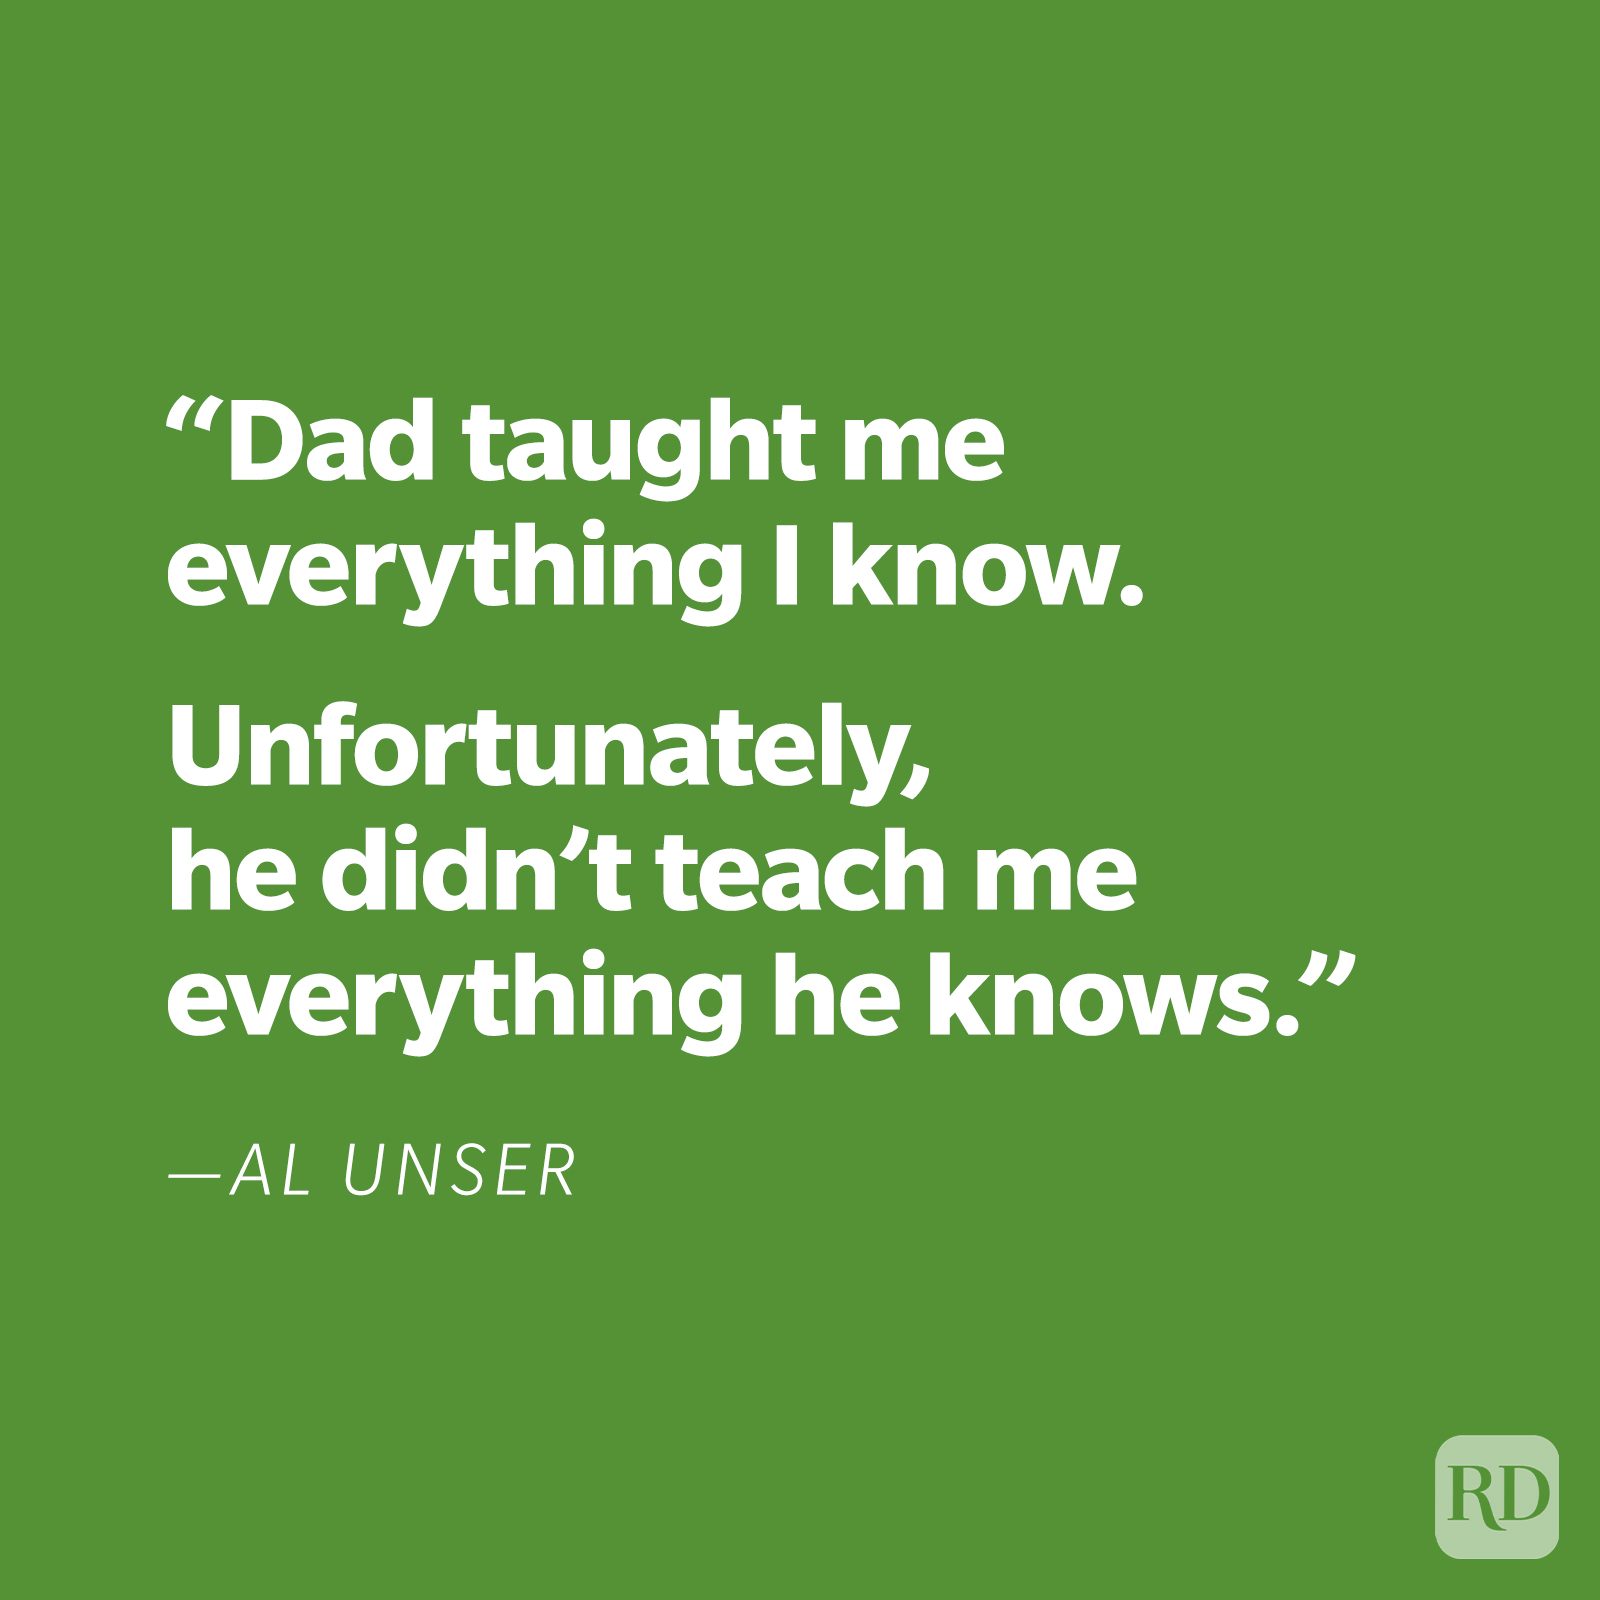 "Dad taught me everything I know. Unfortunately, he didn't teach me everything he knows." —Al Unser